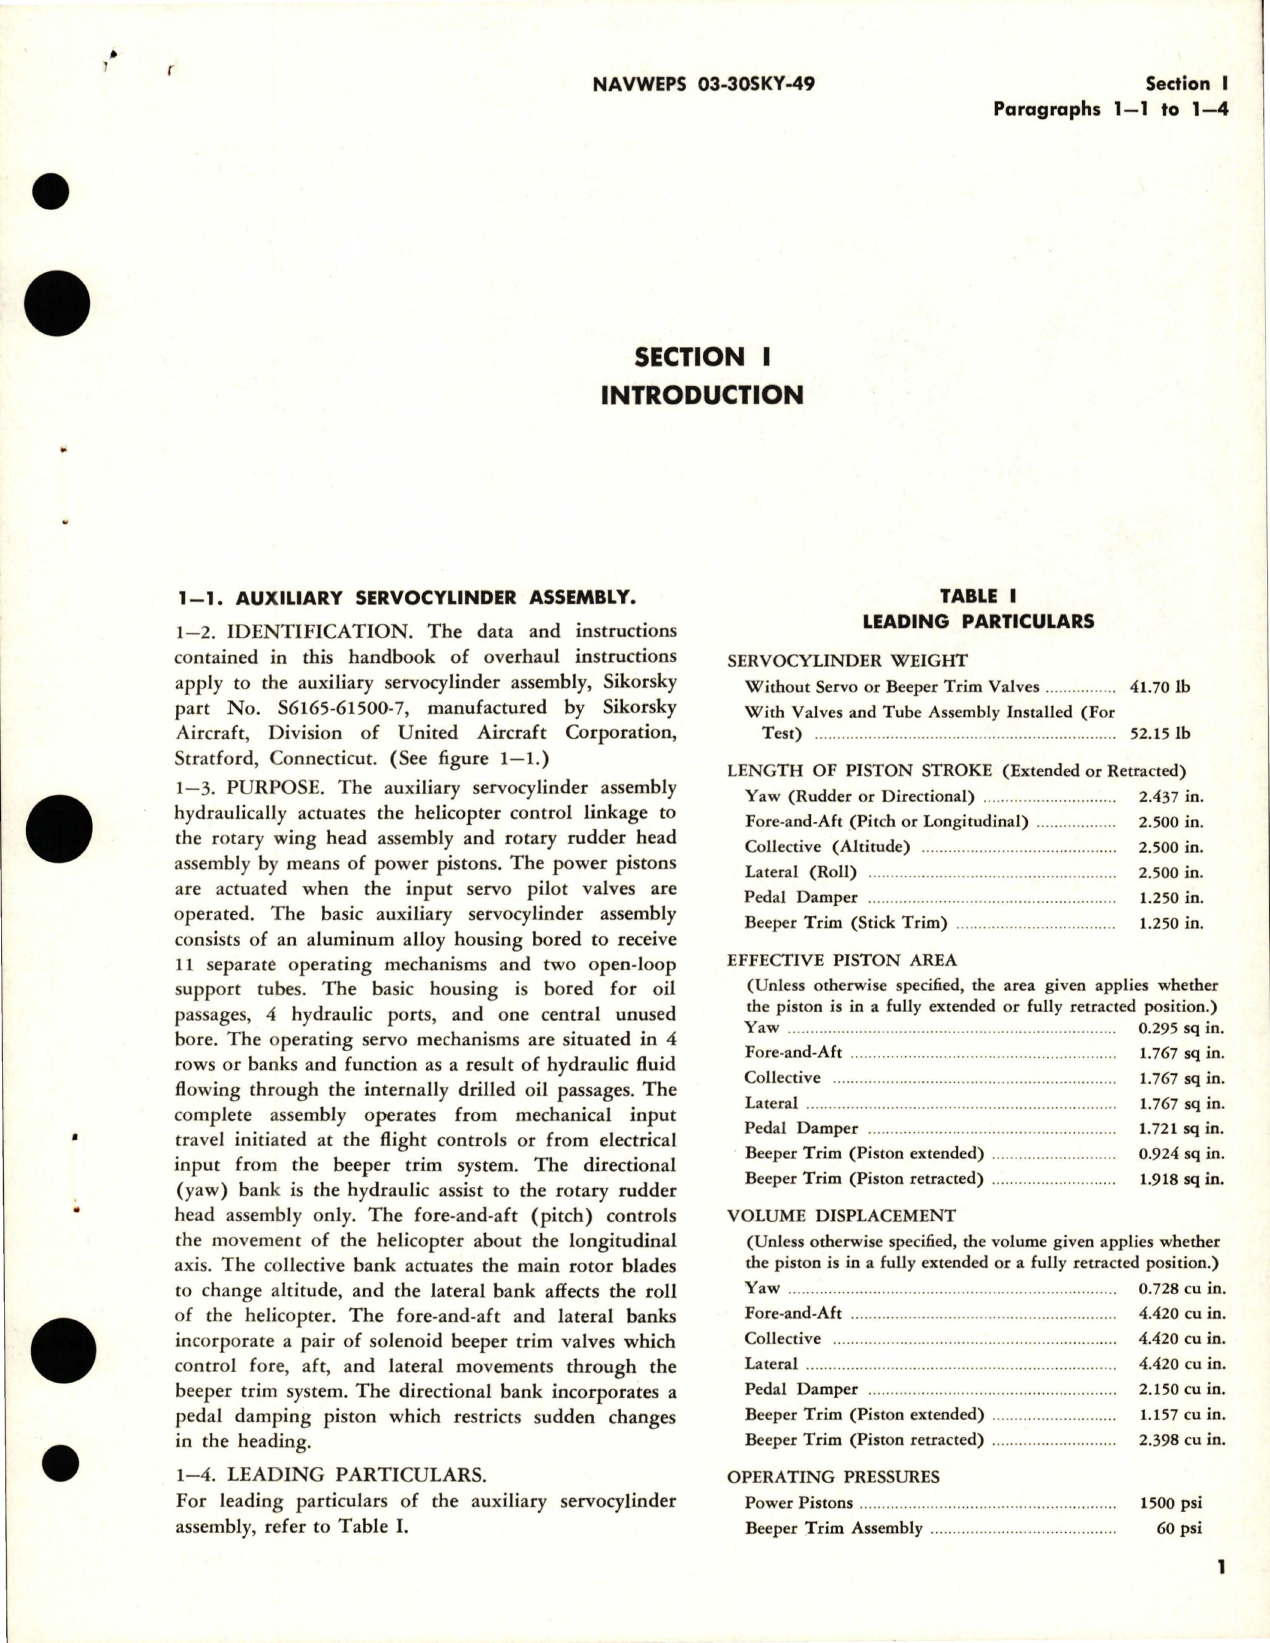 Sample page 5 from AirCorps Library document: Overhaul Instructions for Auxiliary Servocylinder Assembly - Parts S6165-61500-6, S6165-61500-7, and S6165-61500-10 